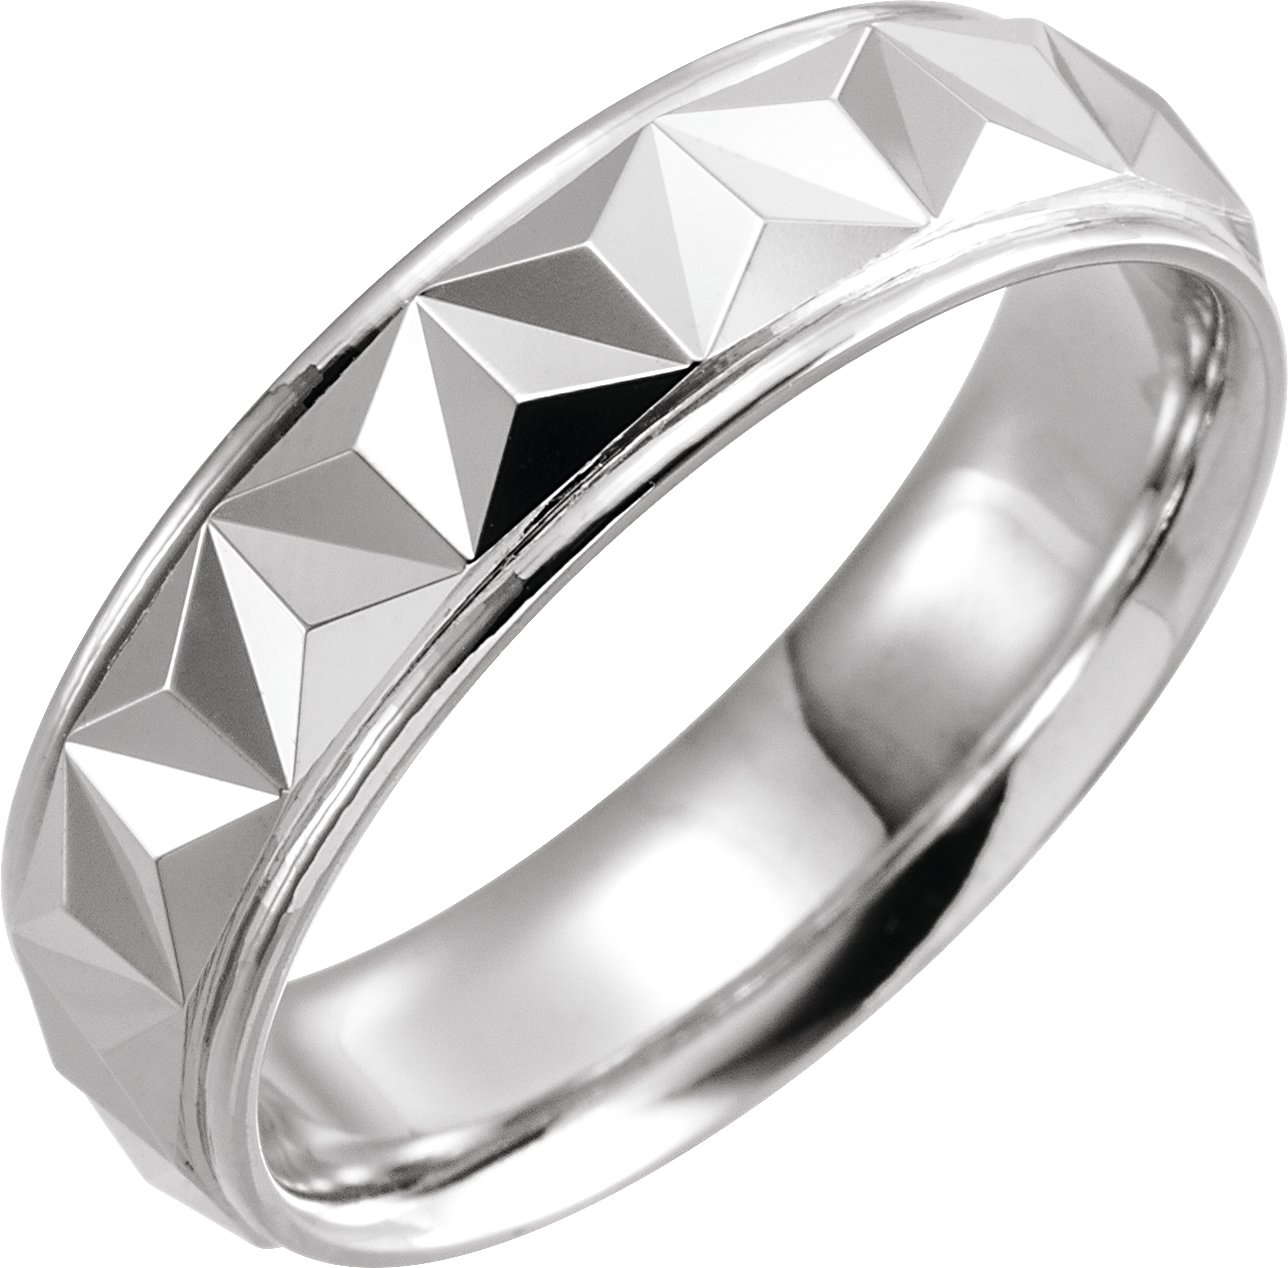 Continuum Sterling Silver 6 mm Geometric Band with Polished Finish Size 16.5